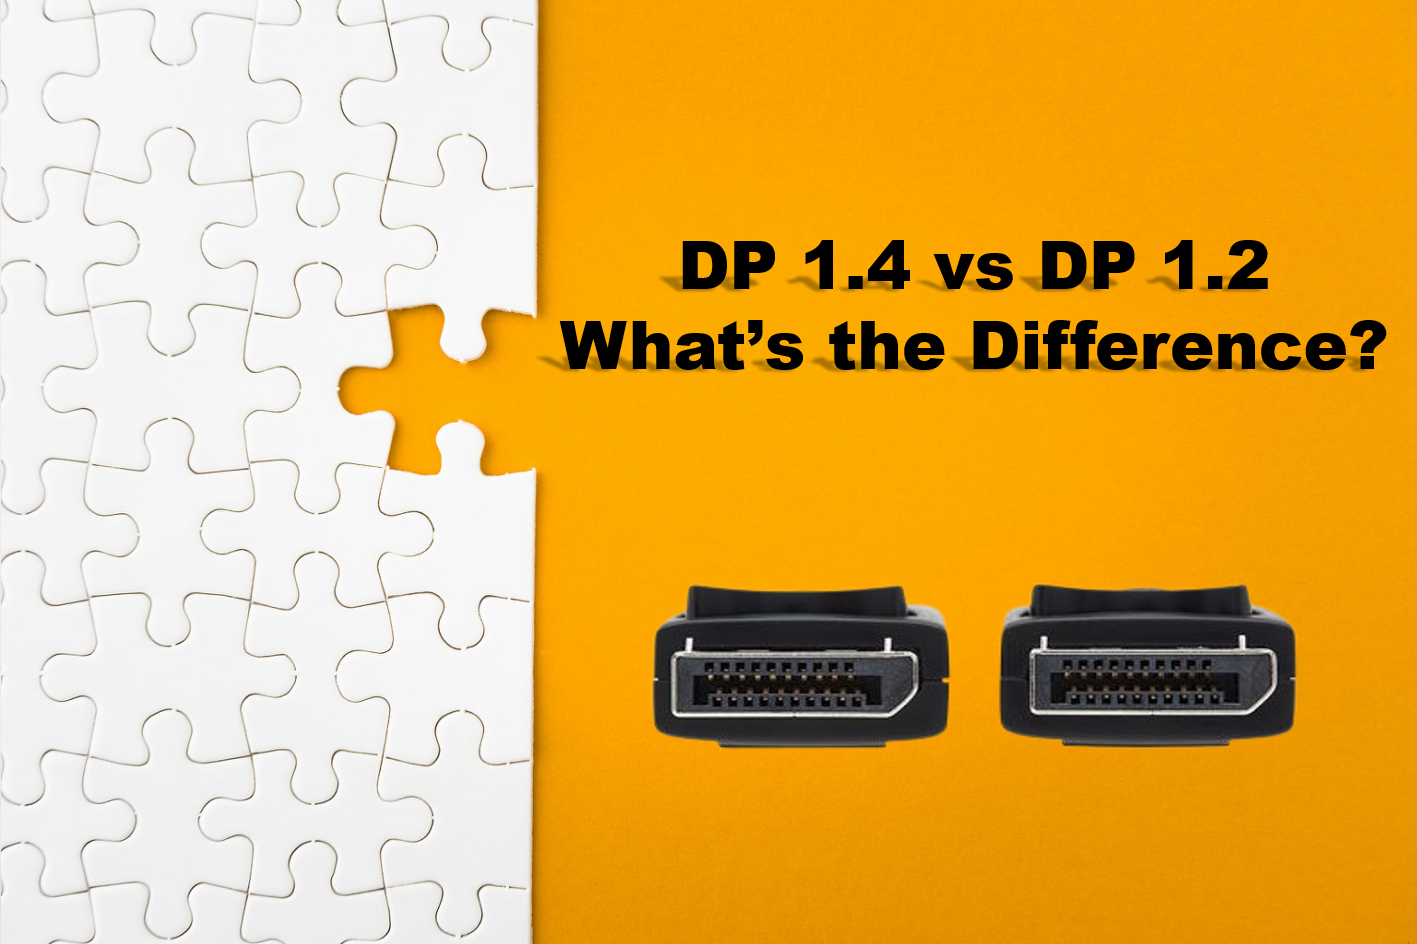 DP 1.4 vs DP 1.2: What’s the Difference?